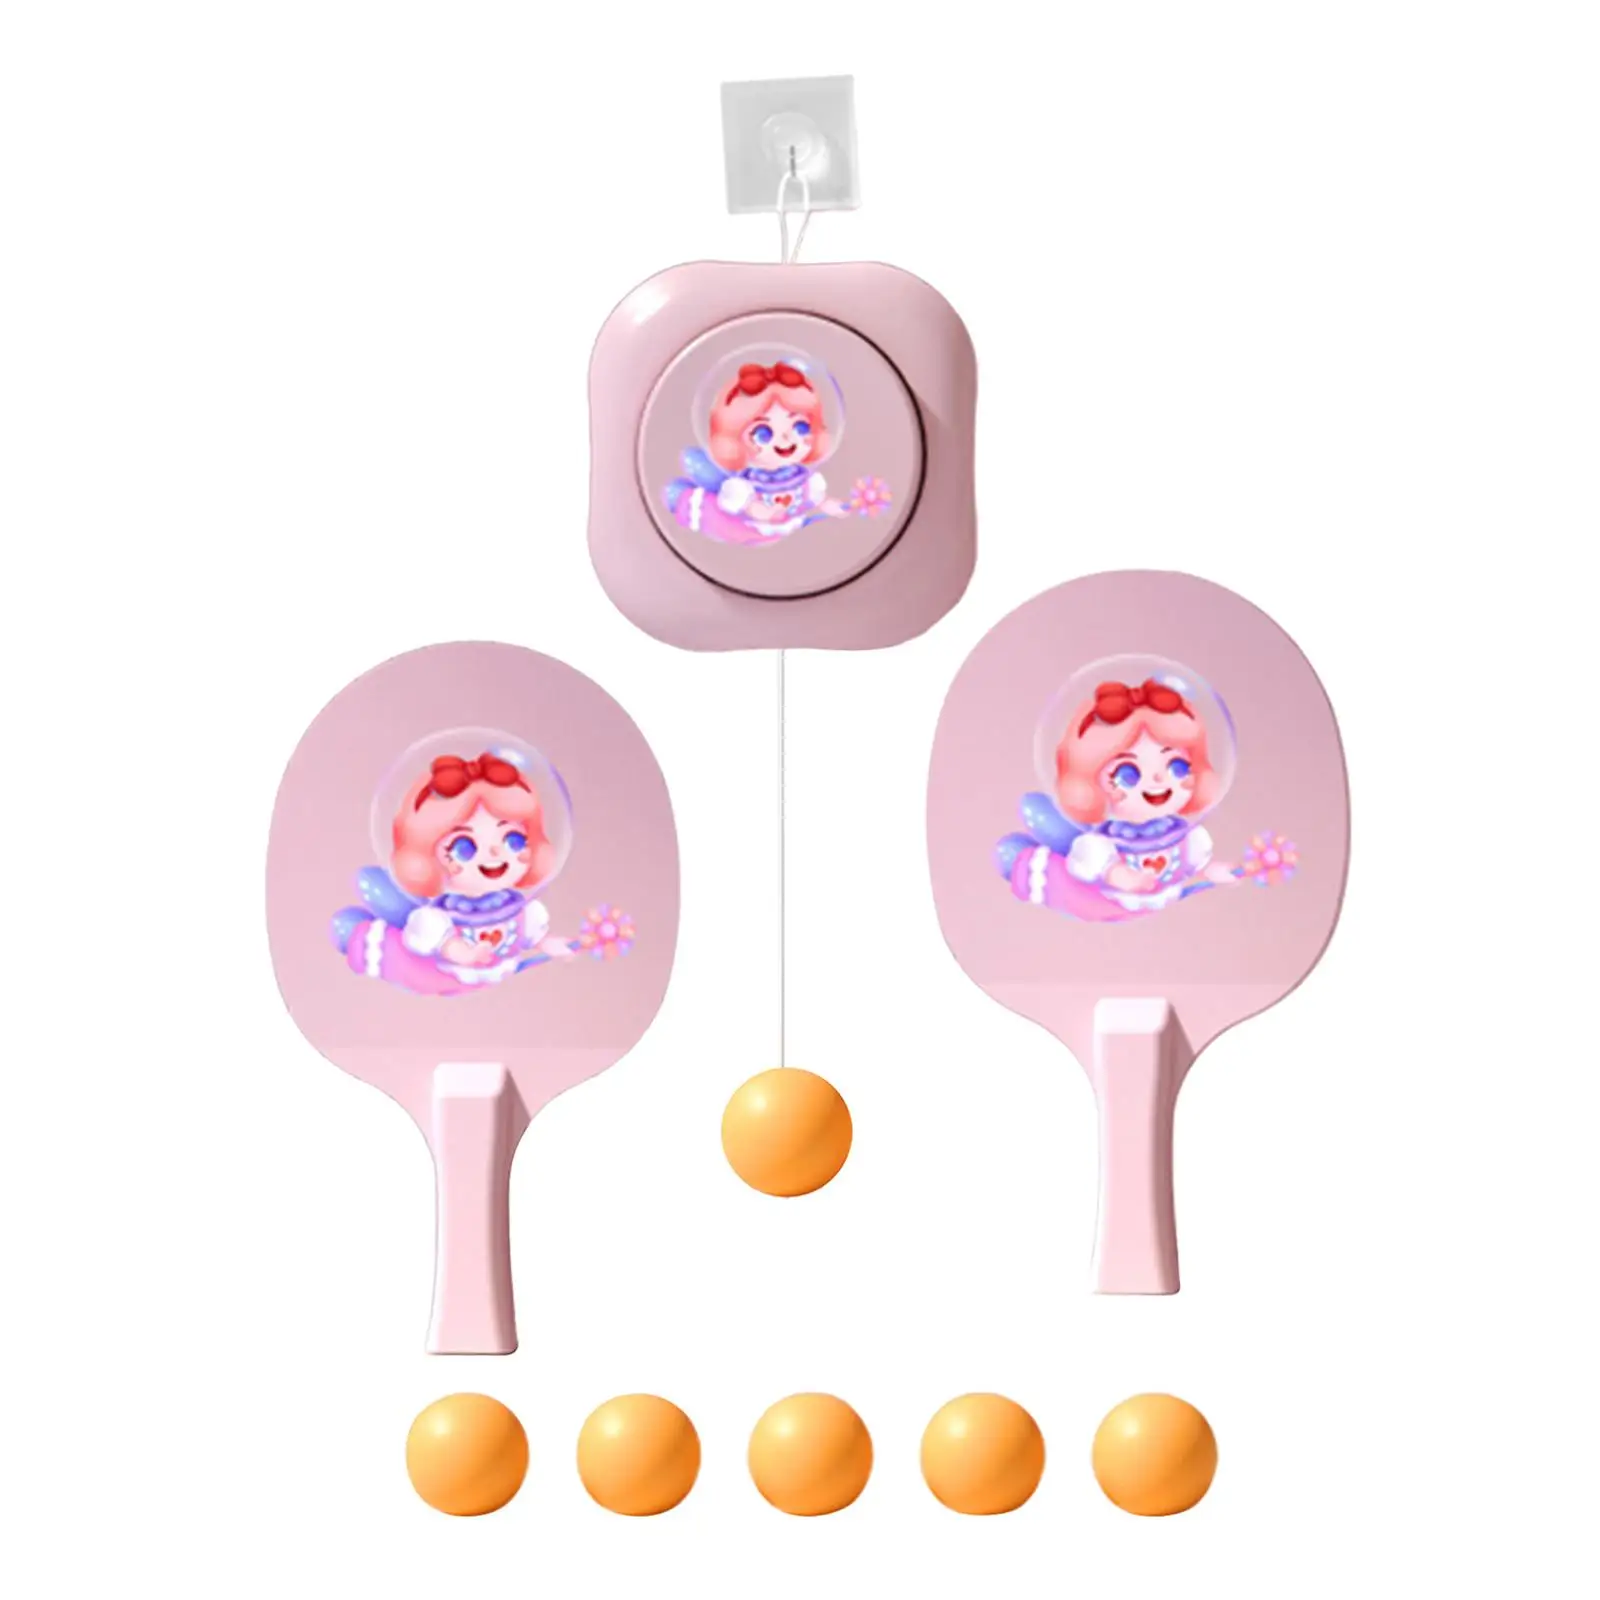 Indoor Hanging Table Tennis with Paddles and Balls for Girls Children Kids